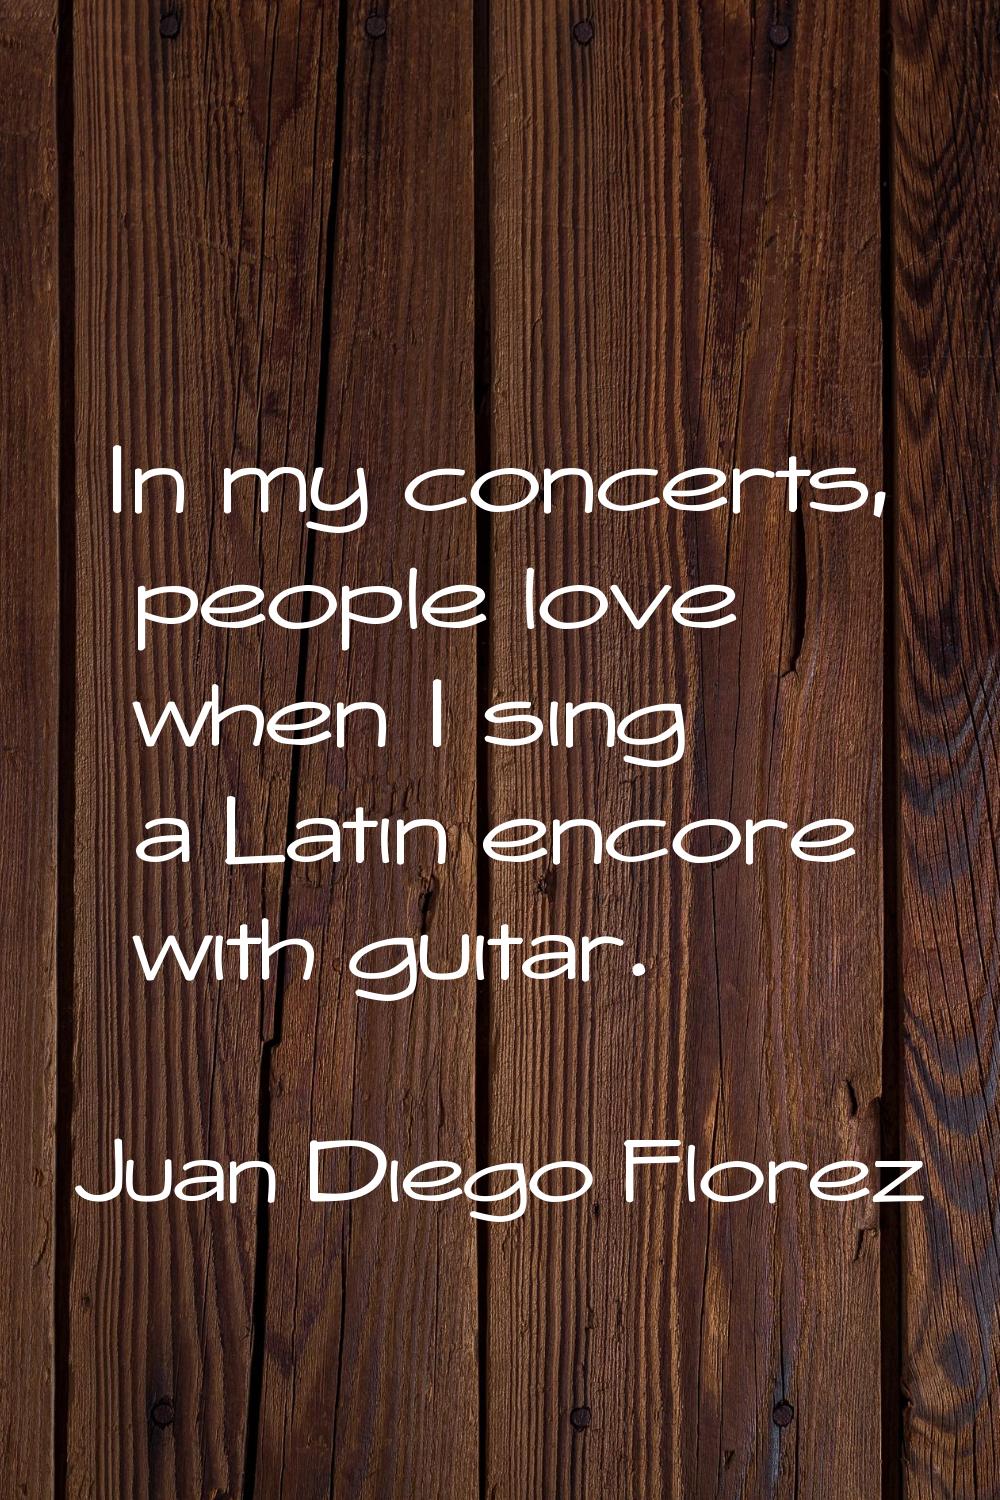 In my concerts, people love when I sing a Latin encore with guitar.